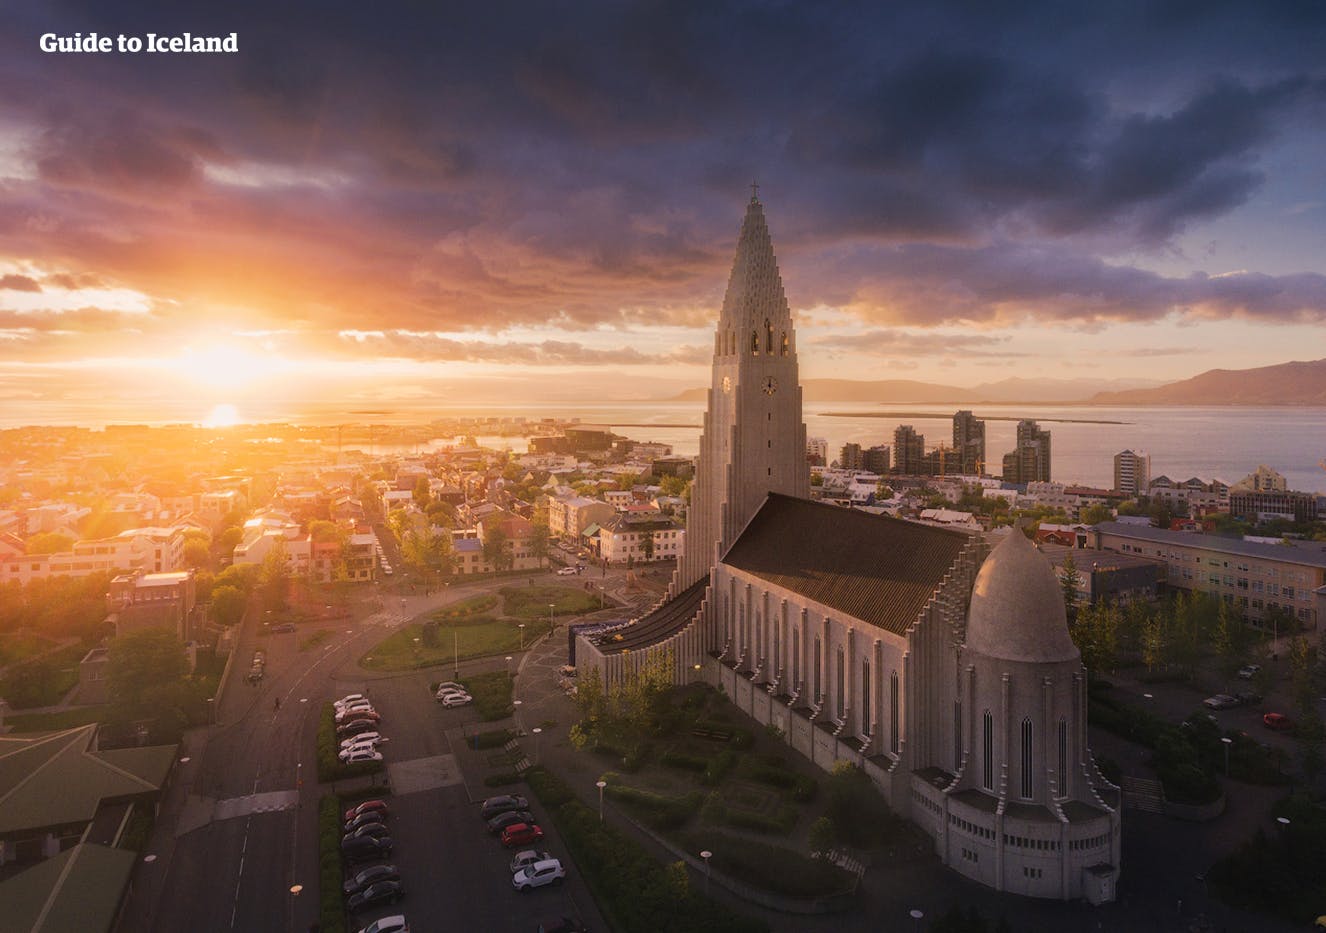 8 Day Summer Vacation Package Tour of the Best Attractions in Iceland - day 1